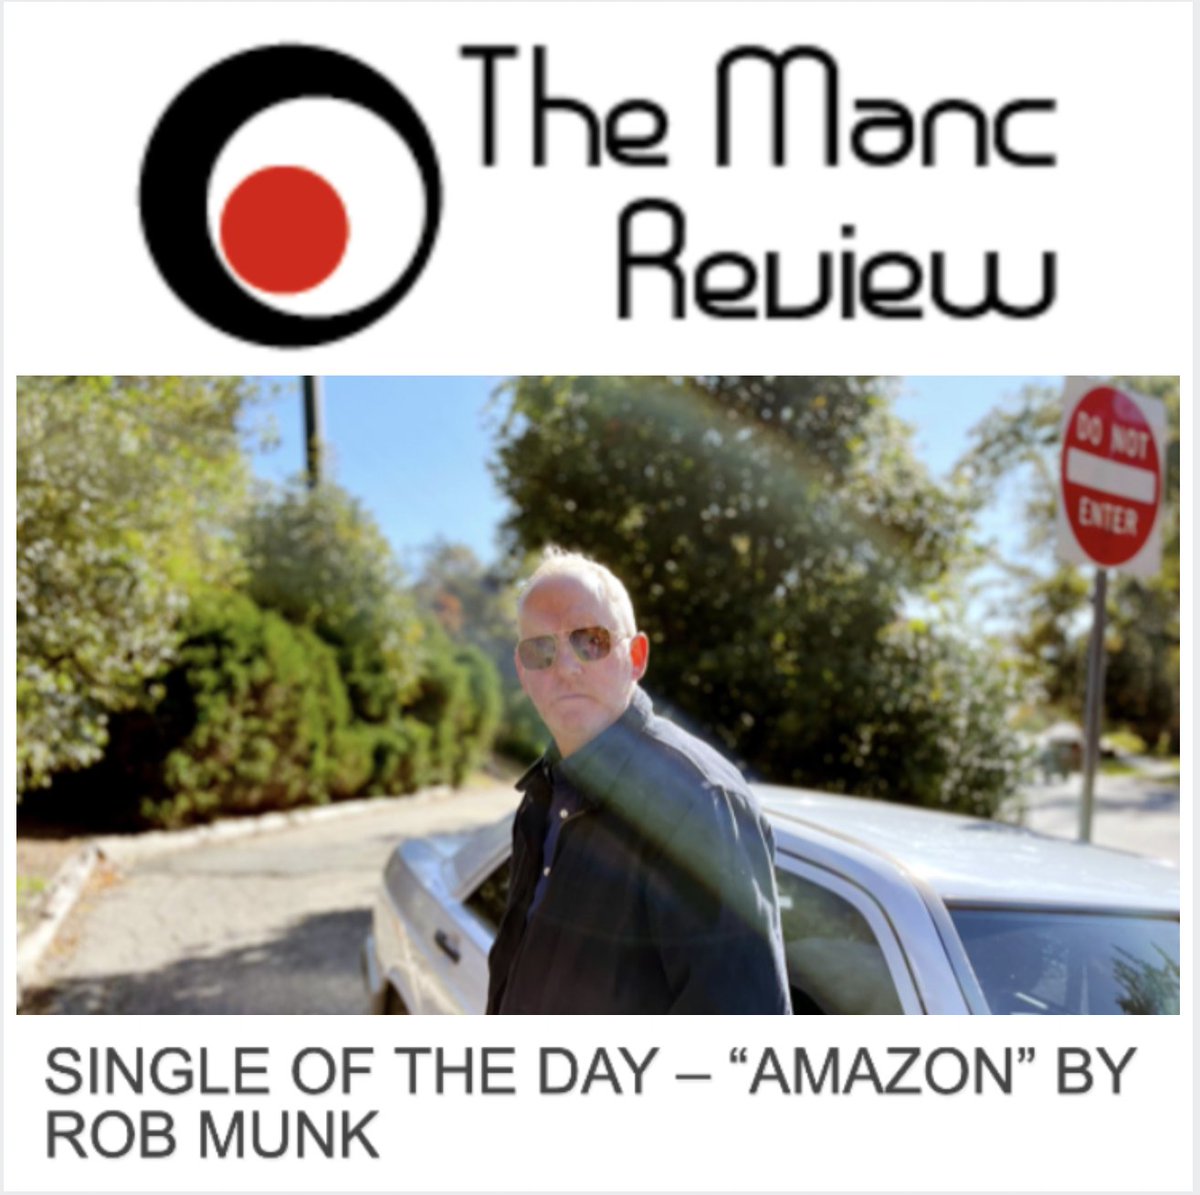 'Amazon' by #RobMunk, out now via @MagicDoorMusic, is SINGLE OF THE DAY in Manchester's #TheMancReview. Check out the full review at - tinyurl.com/yc34djk2 @RobMunkMusic @musicblogrt @creatorzrt @lovingblogs @ArtistRTweeters @OurBloggingLife @KetchemRay #Newjersey #indiemusic